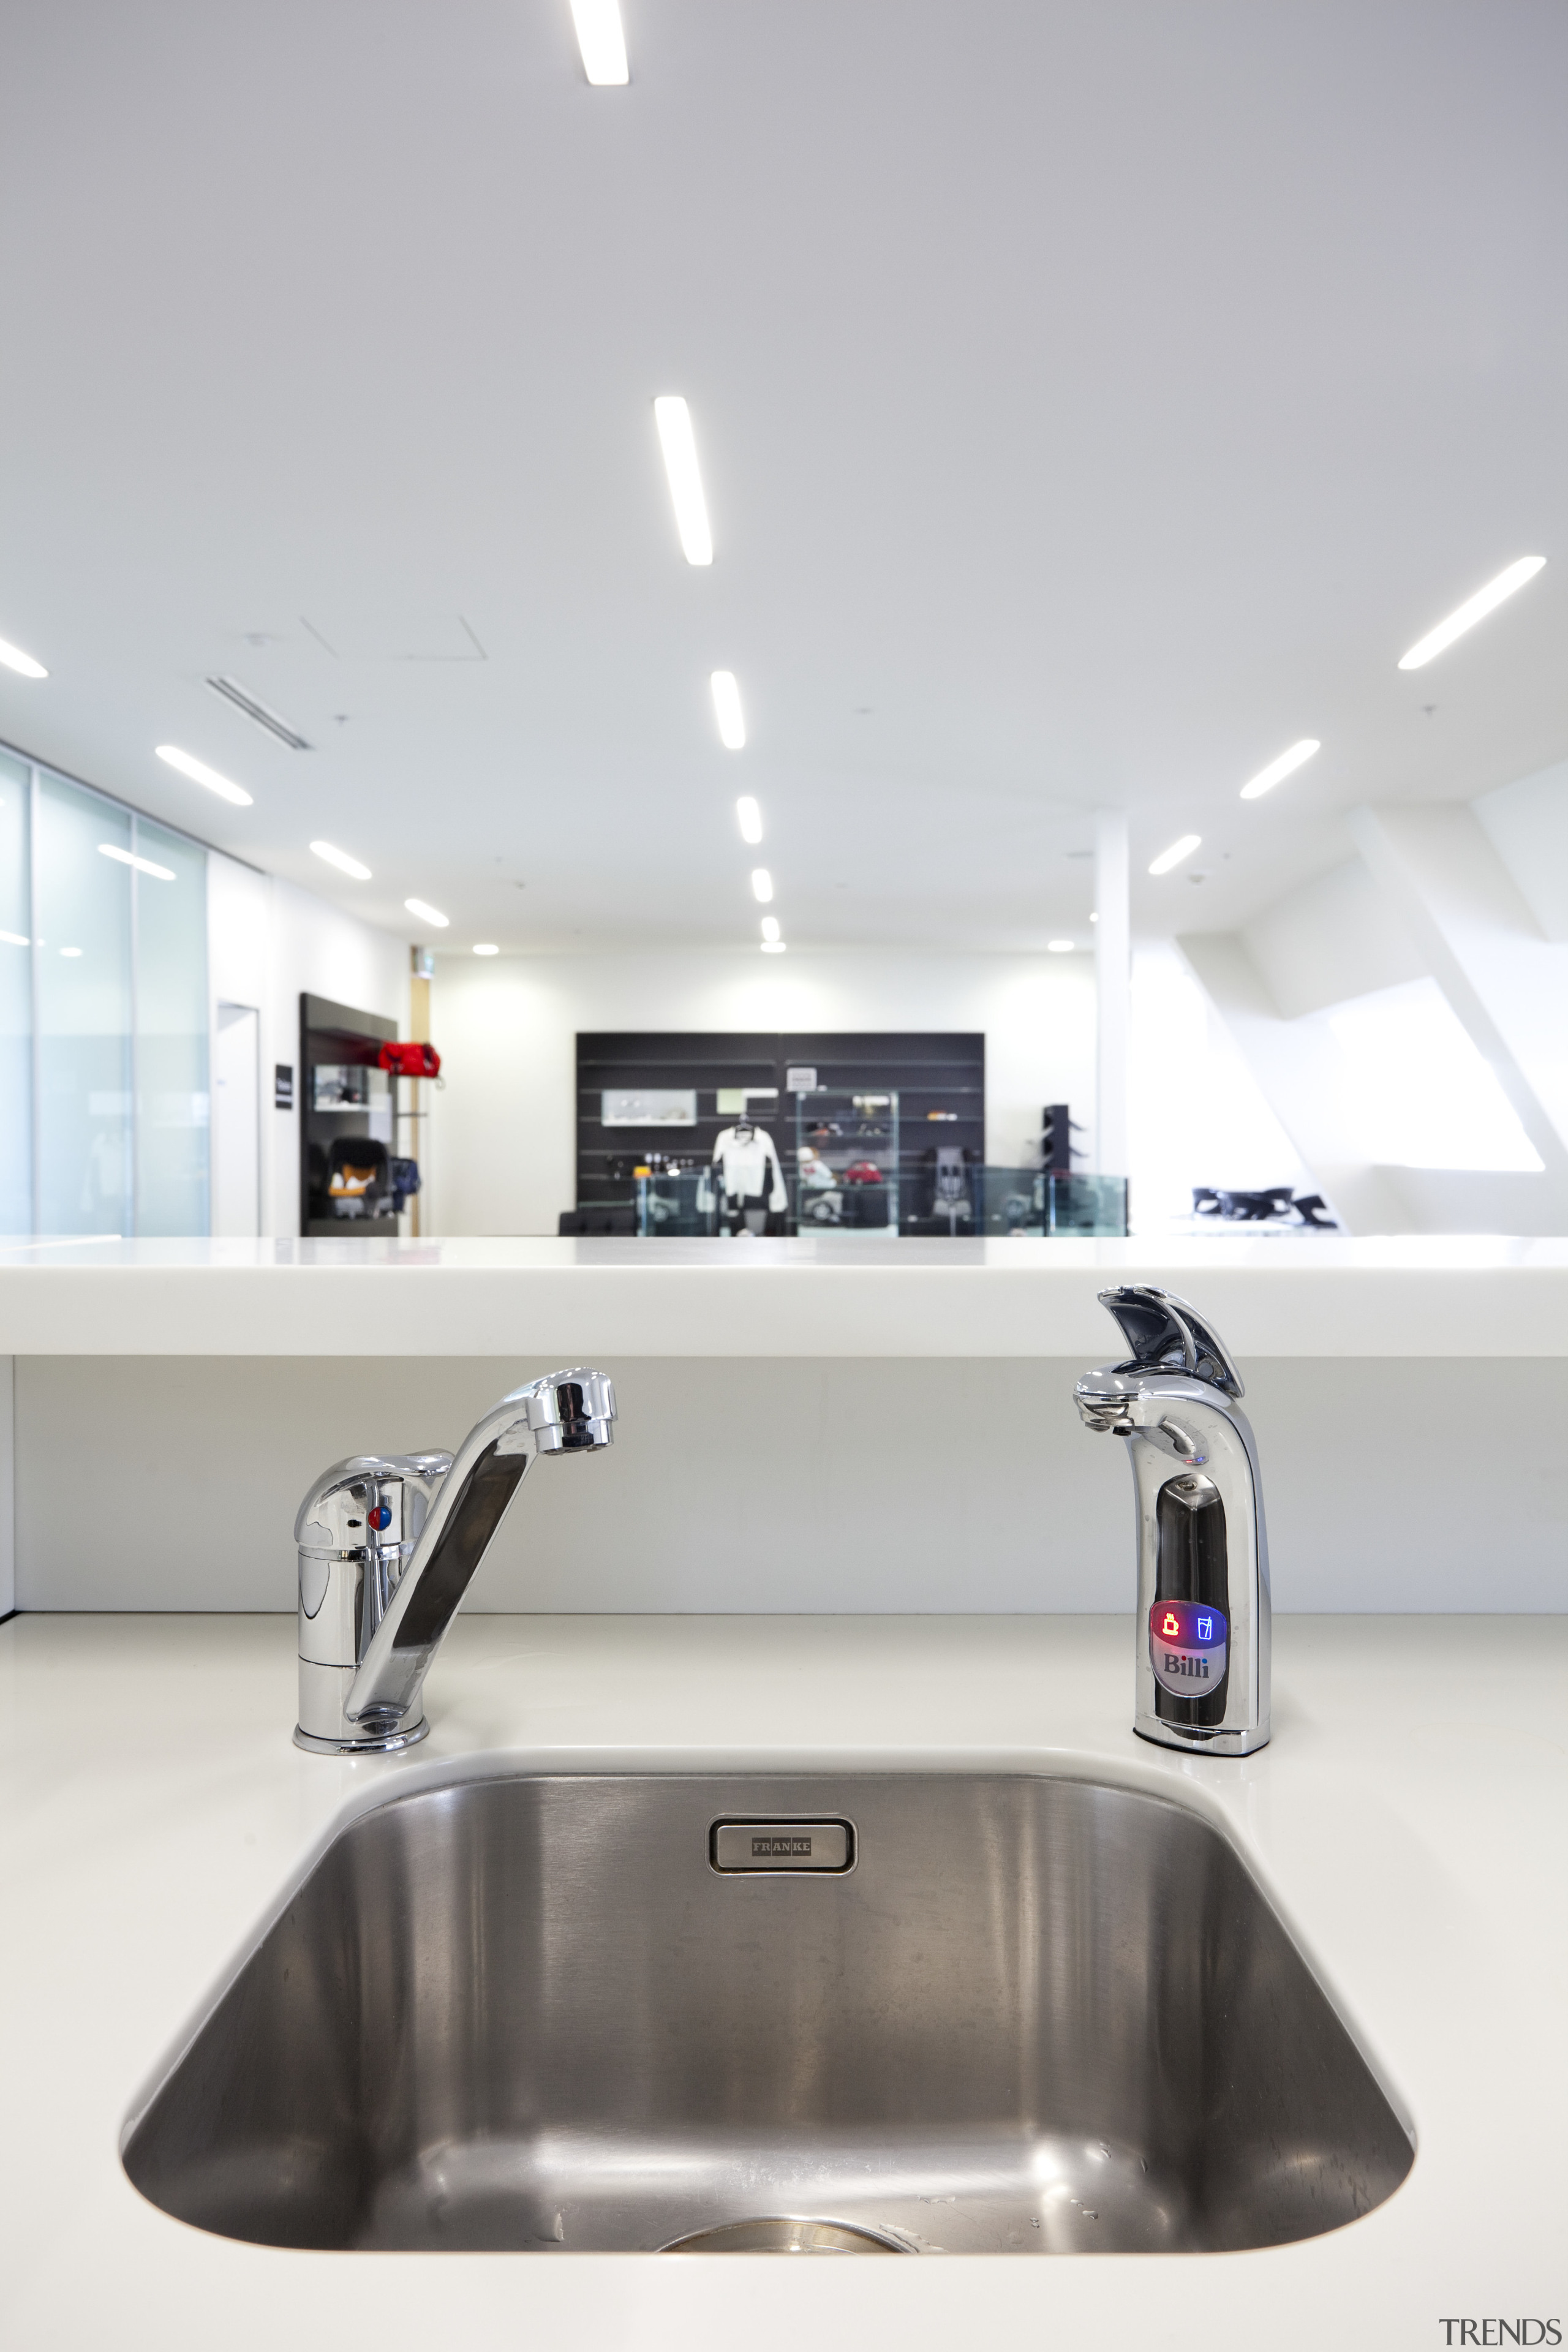 Seen here is a drinking-water system designed by interior design, product design, sink, tap, white, gray